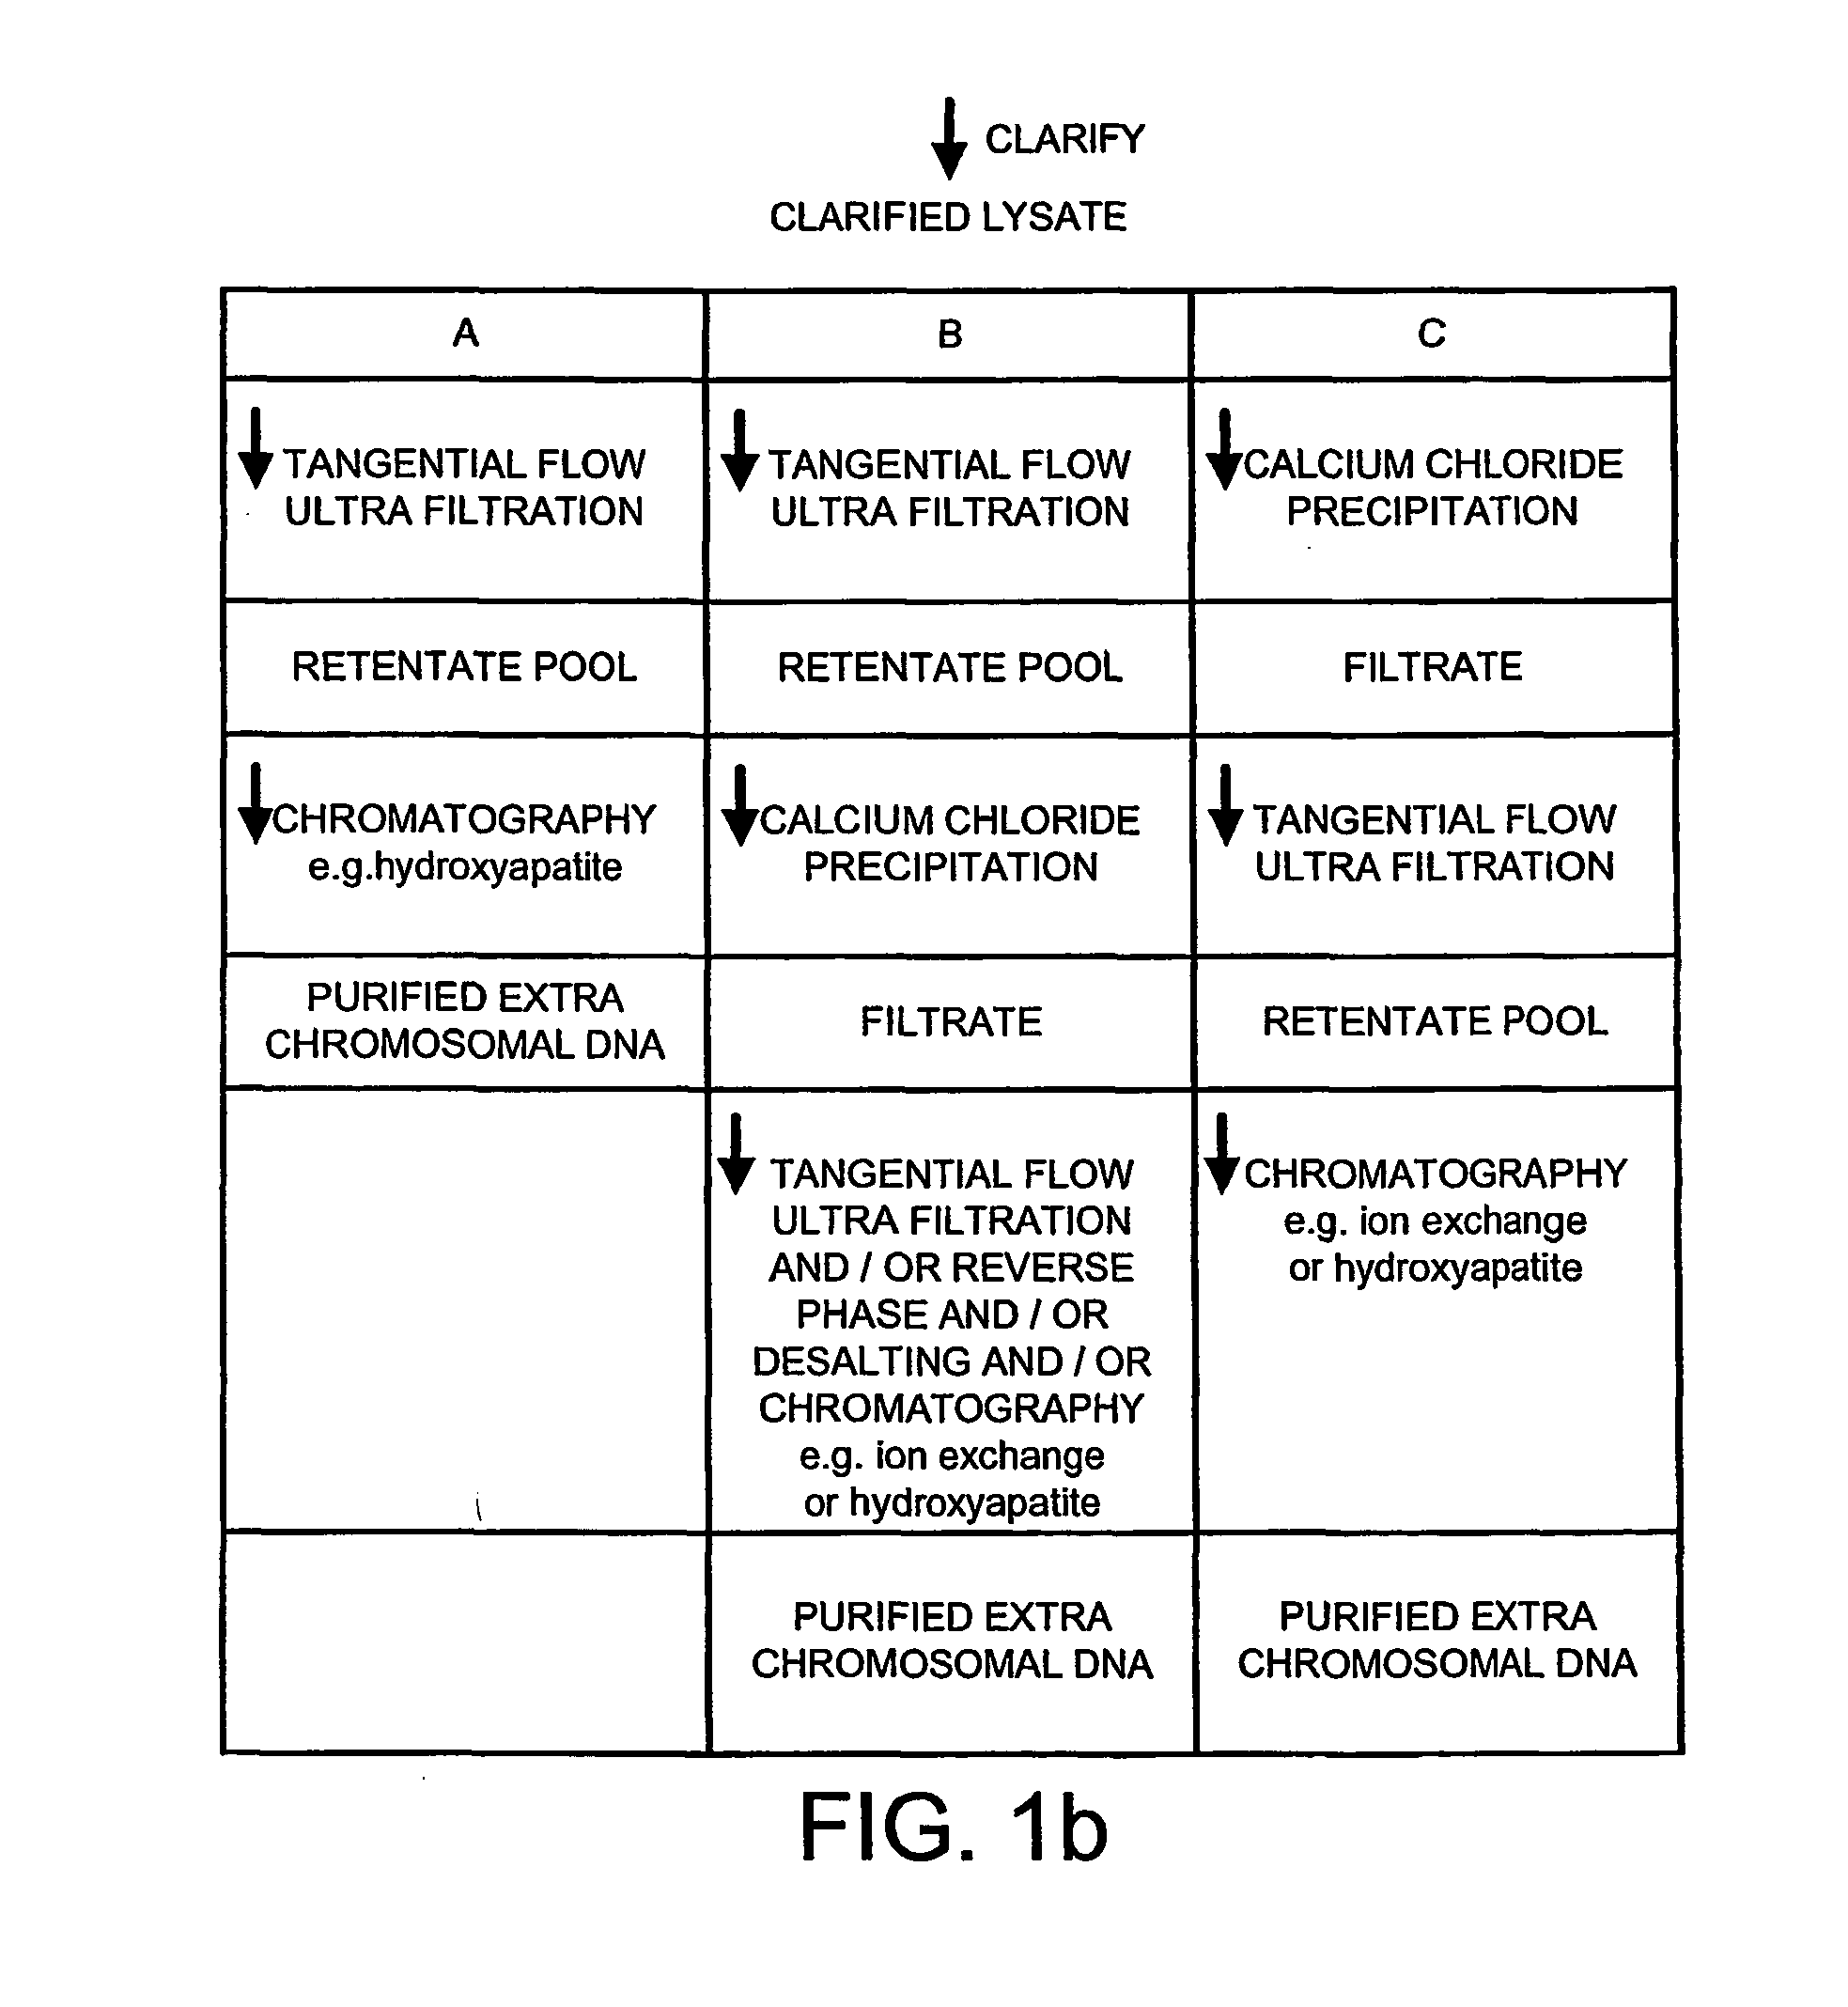 Method of separating extra-chromosonal dna from other cellular components